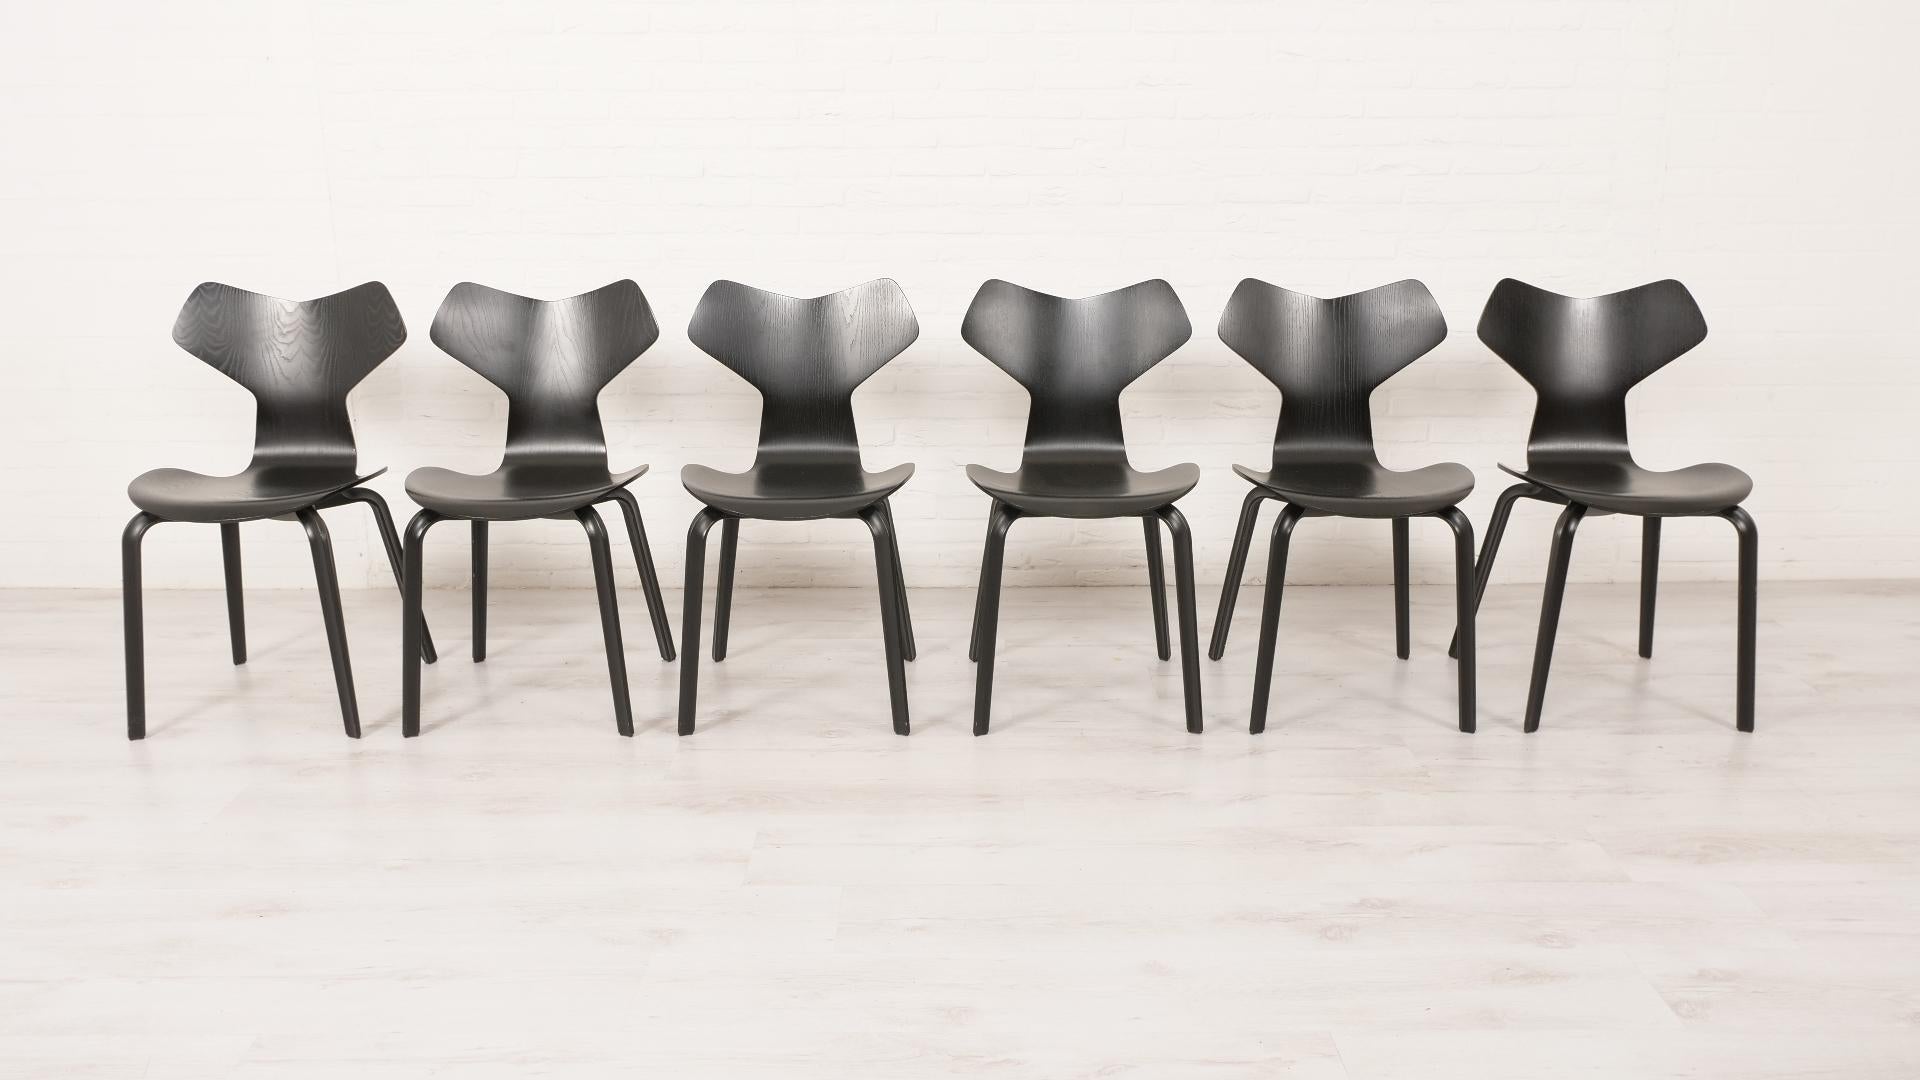 These beautiful dining room chairs were designed by Arne Jacobsen for Fritz Hansen in 1957. This design was given the type number 3130. In the same year, this design won the Grand Prix prize during the Triennale in Milan and the design was given the